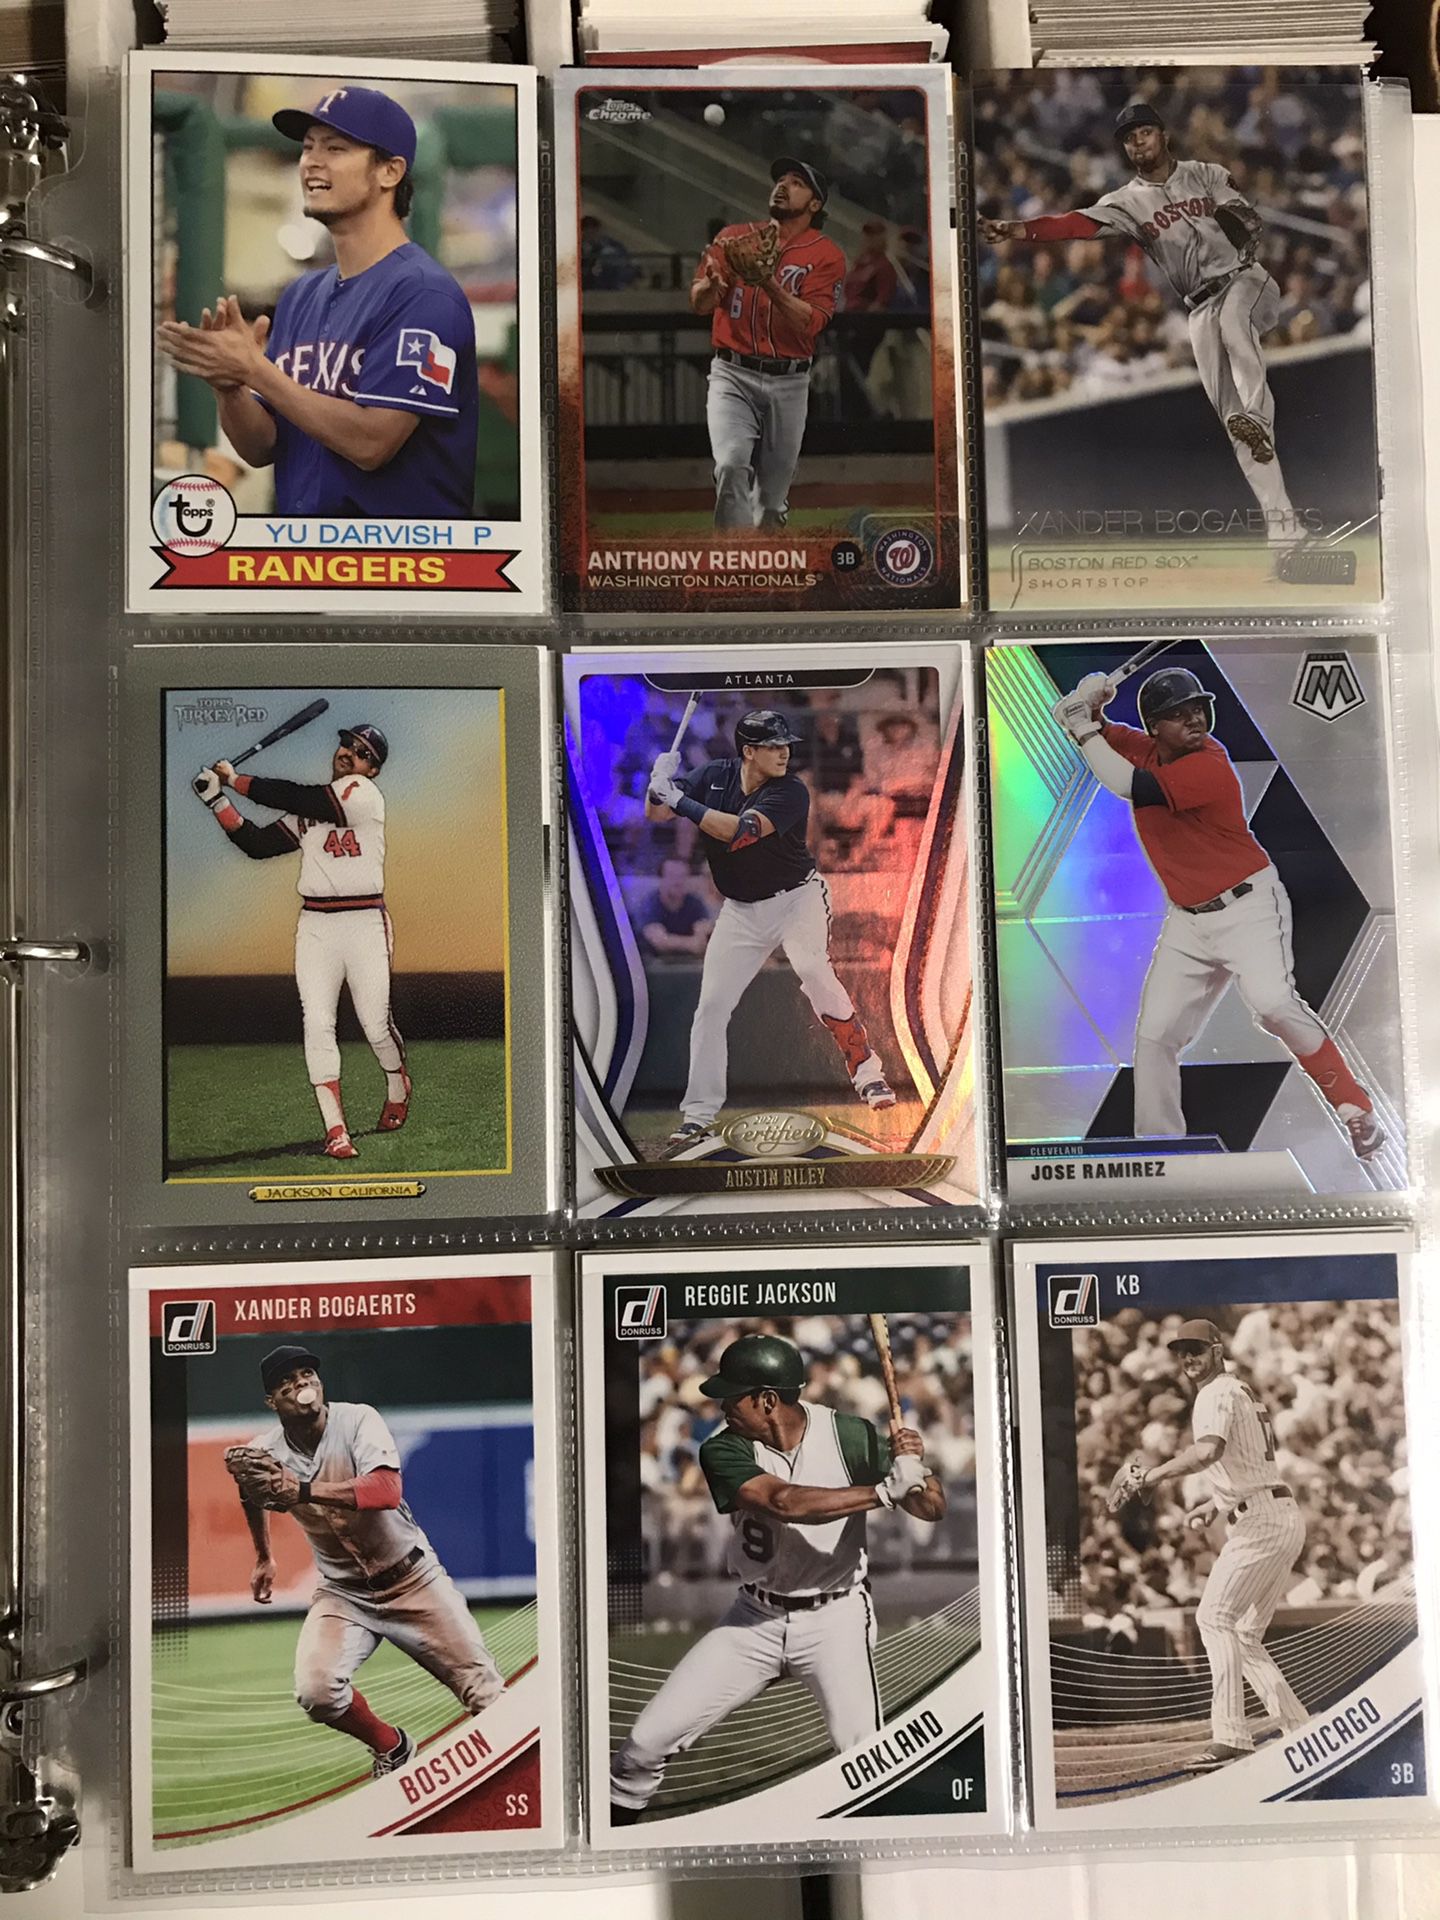 Collection of baseball cards from the 2000’s